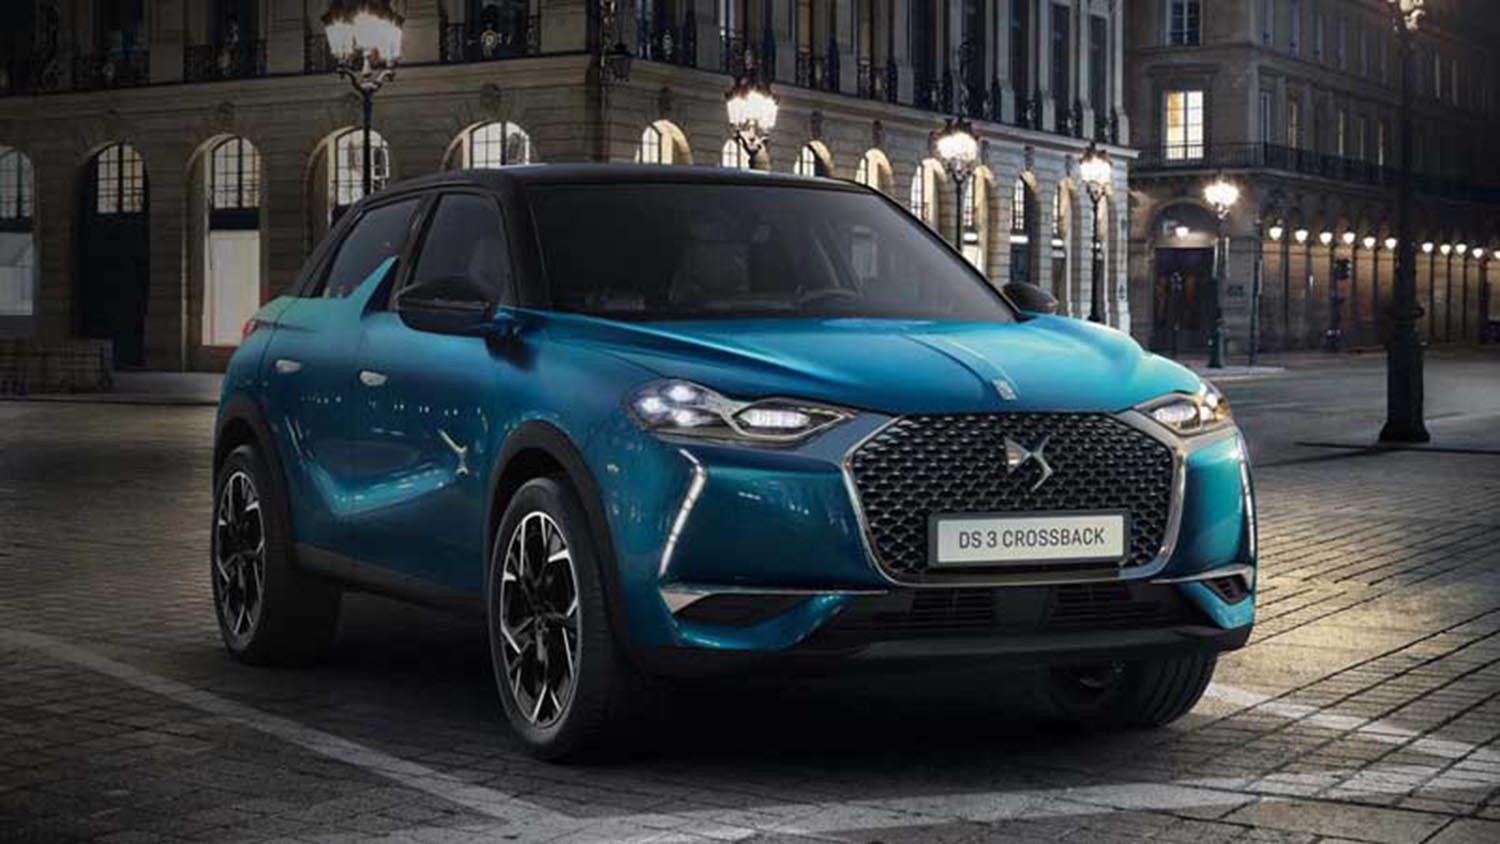 Limited Edition DS 3 Crossback Faubourg – Pushing Its Boundaries